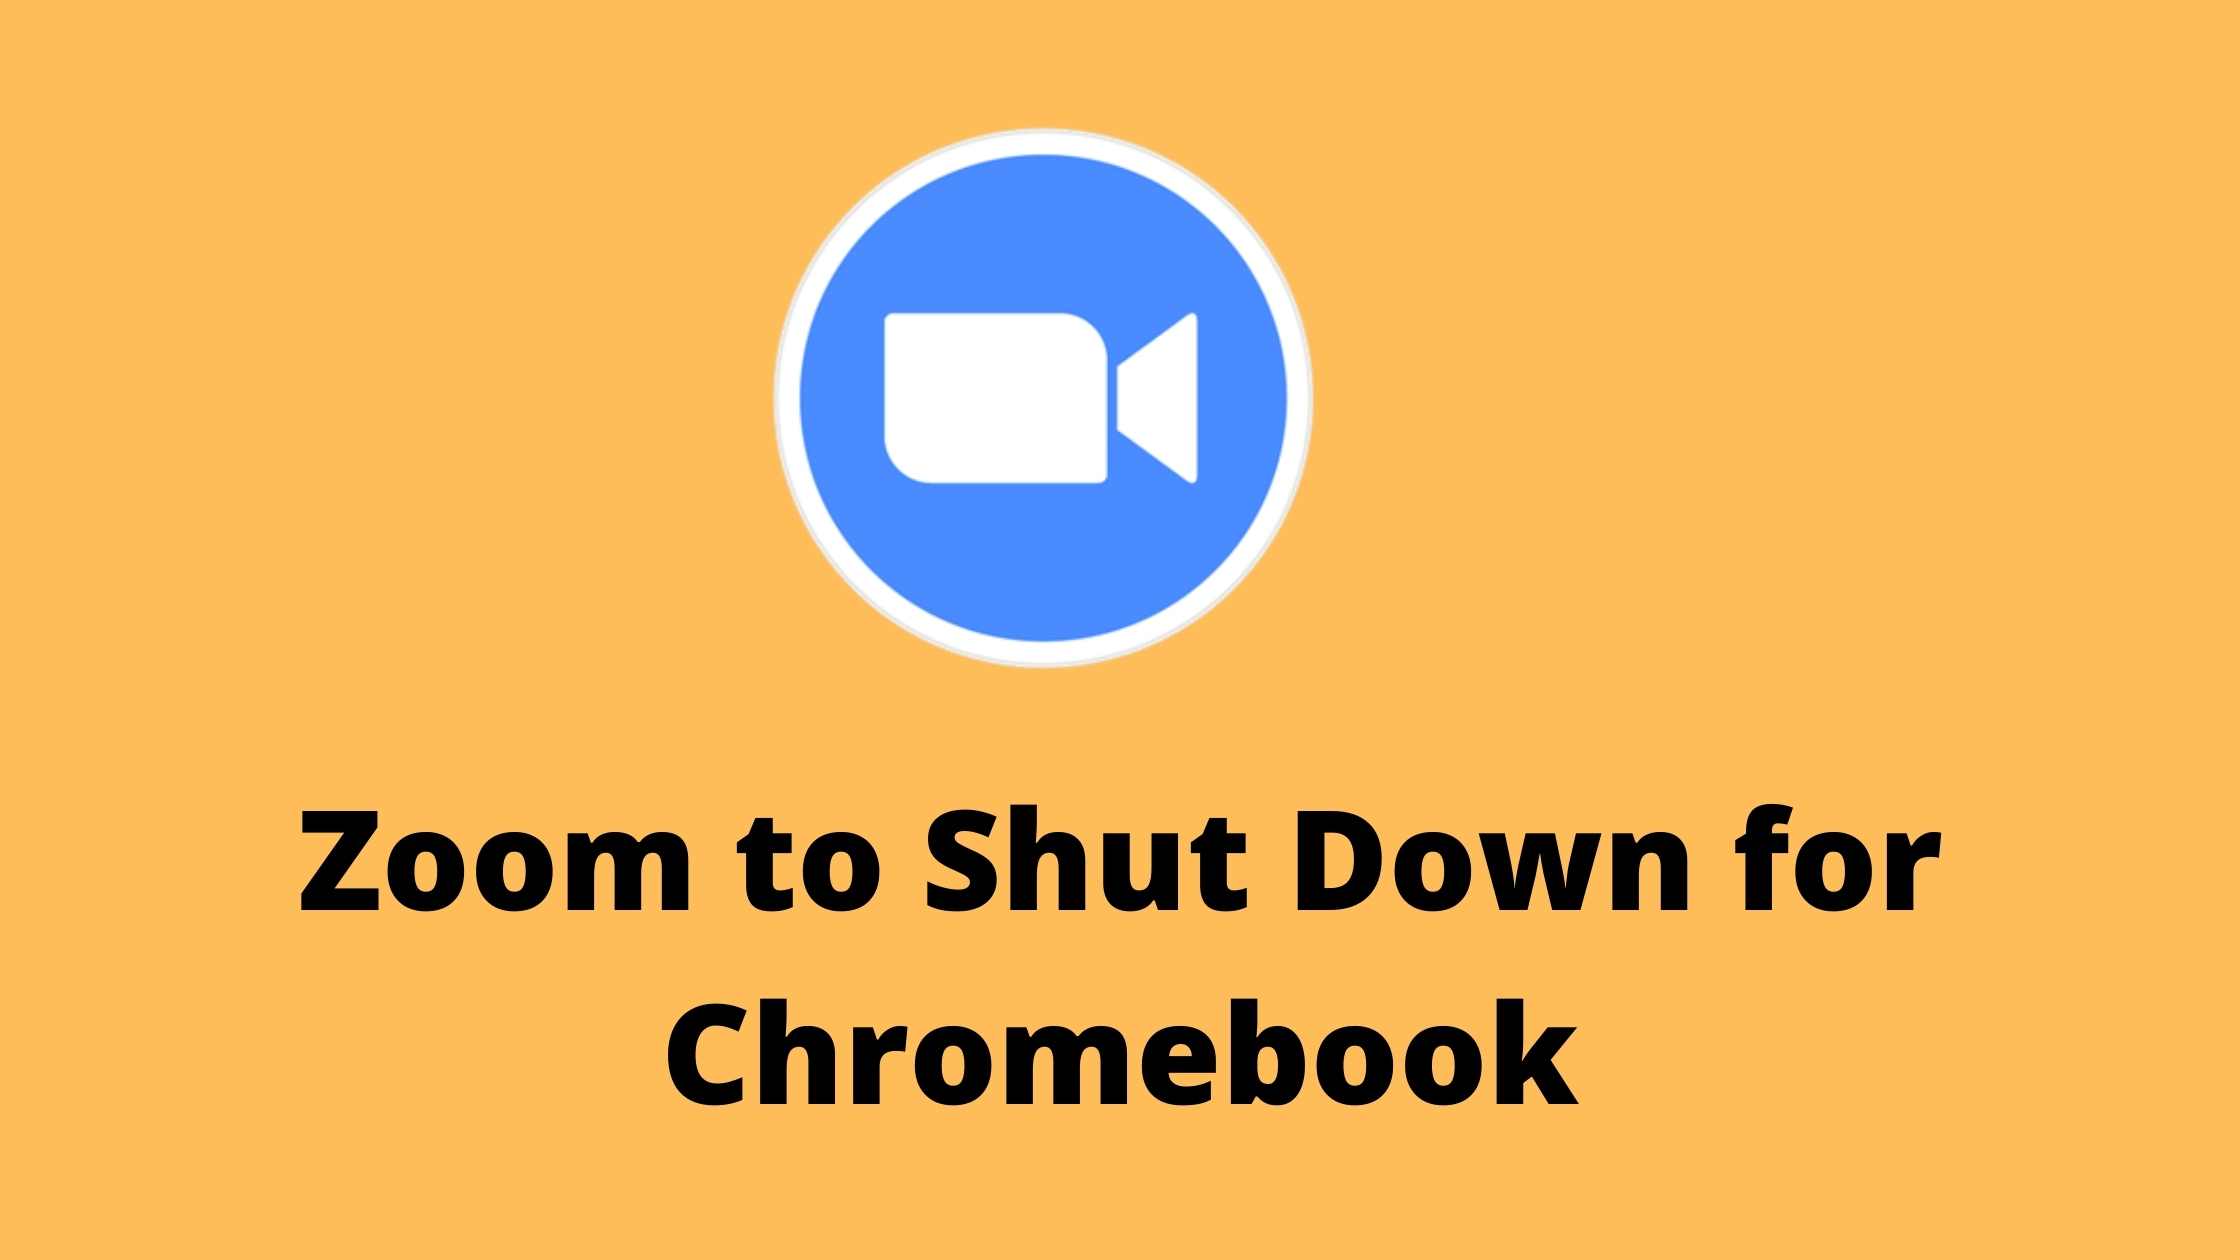 Zoom to shut down for Chromebook